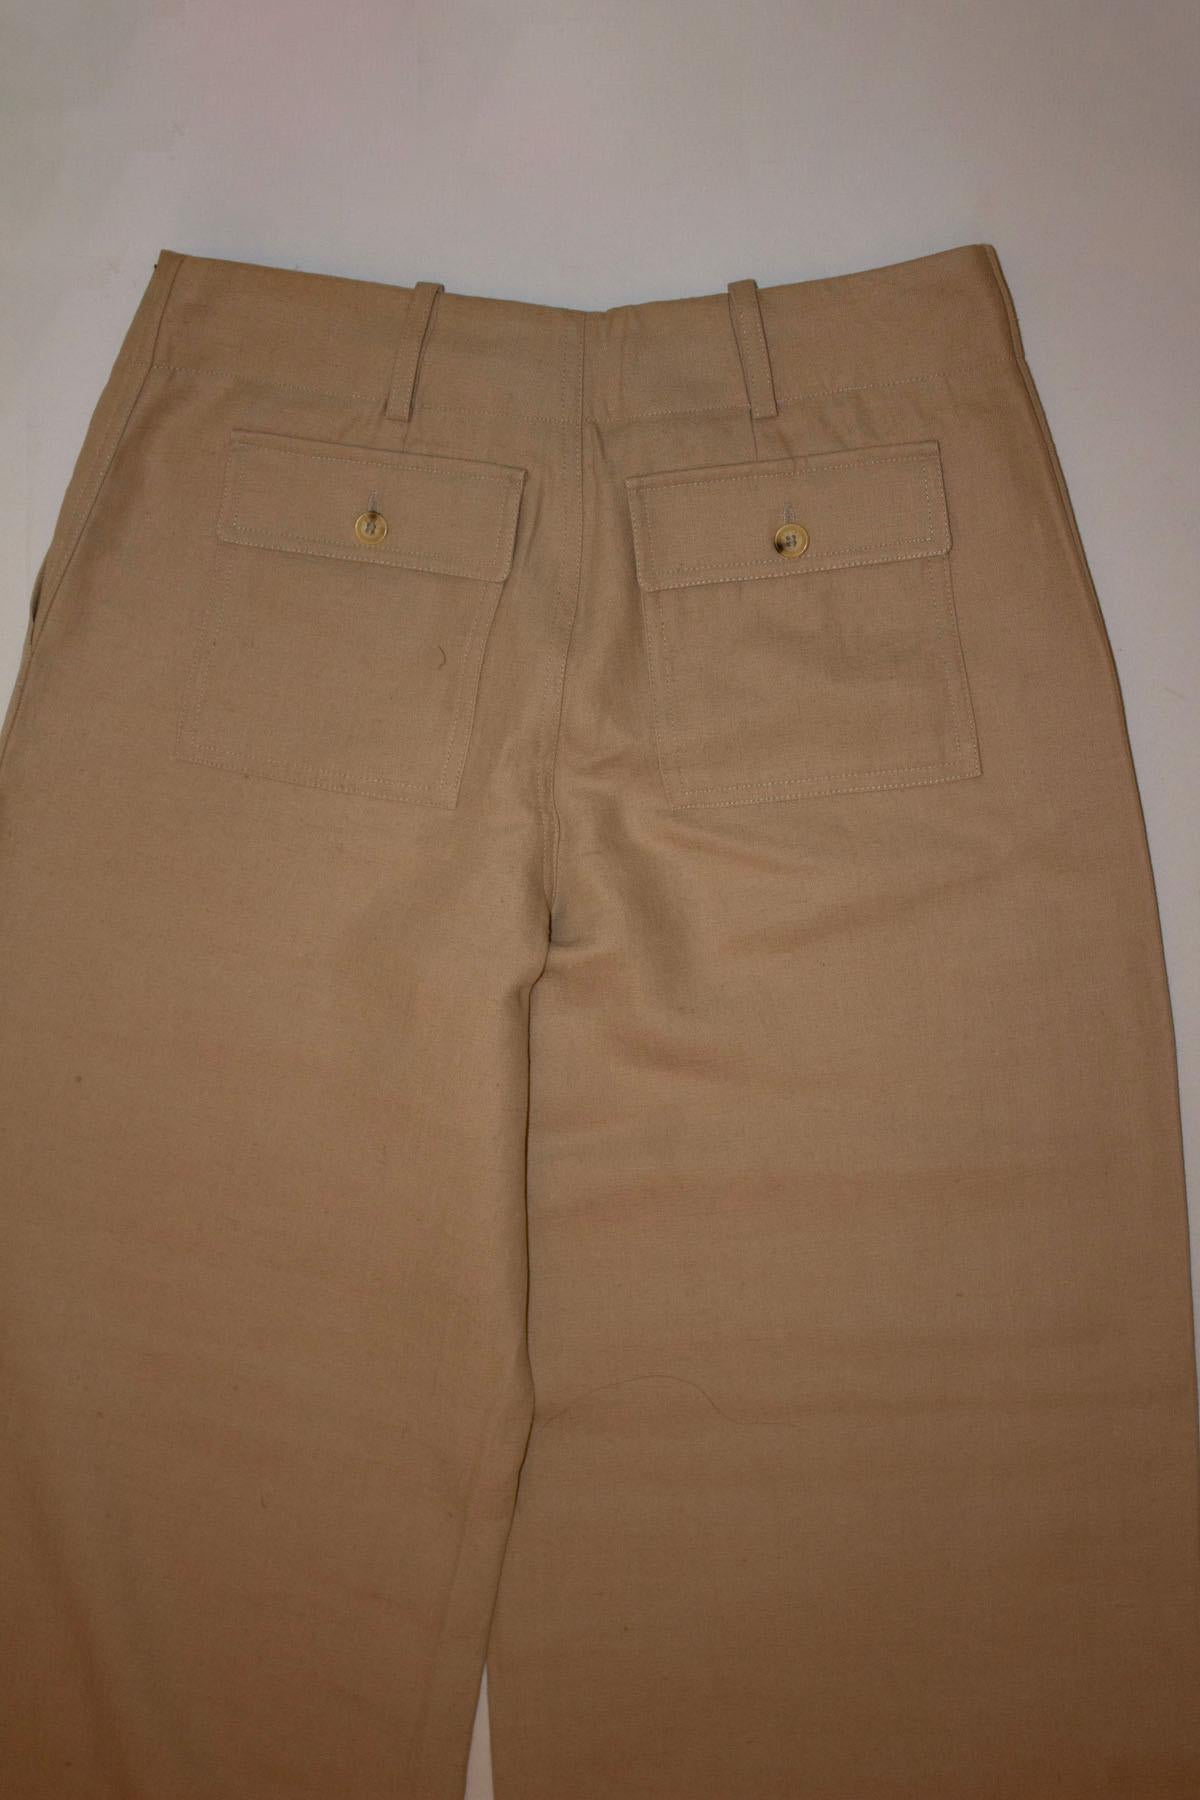 A chic pair of Celine linen pants or trousers.  In a heavy linen fabric they hang beautifully. The trousers have belt hoops,  and 2 back pockets and a very wide leg.  Size 40
Measurements: waist 30'' , inside leg 34'' , hem 2''